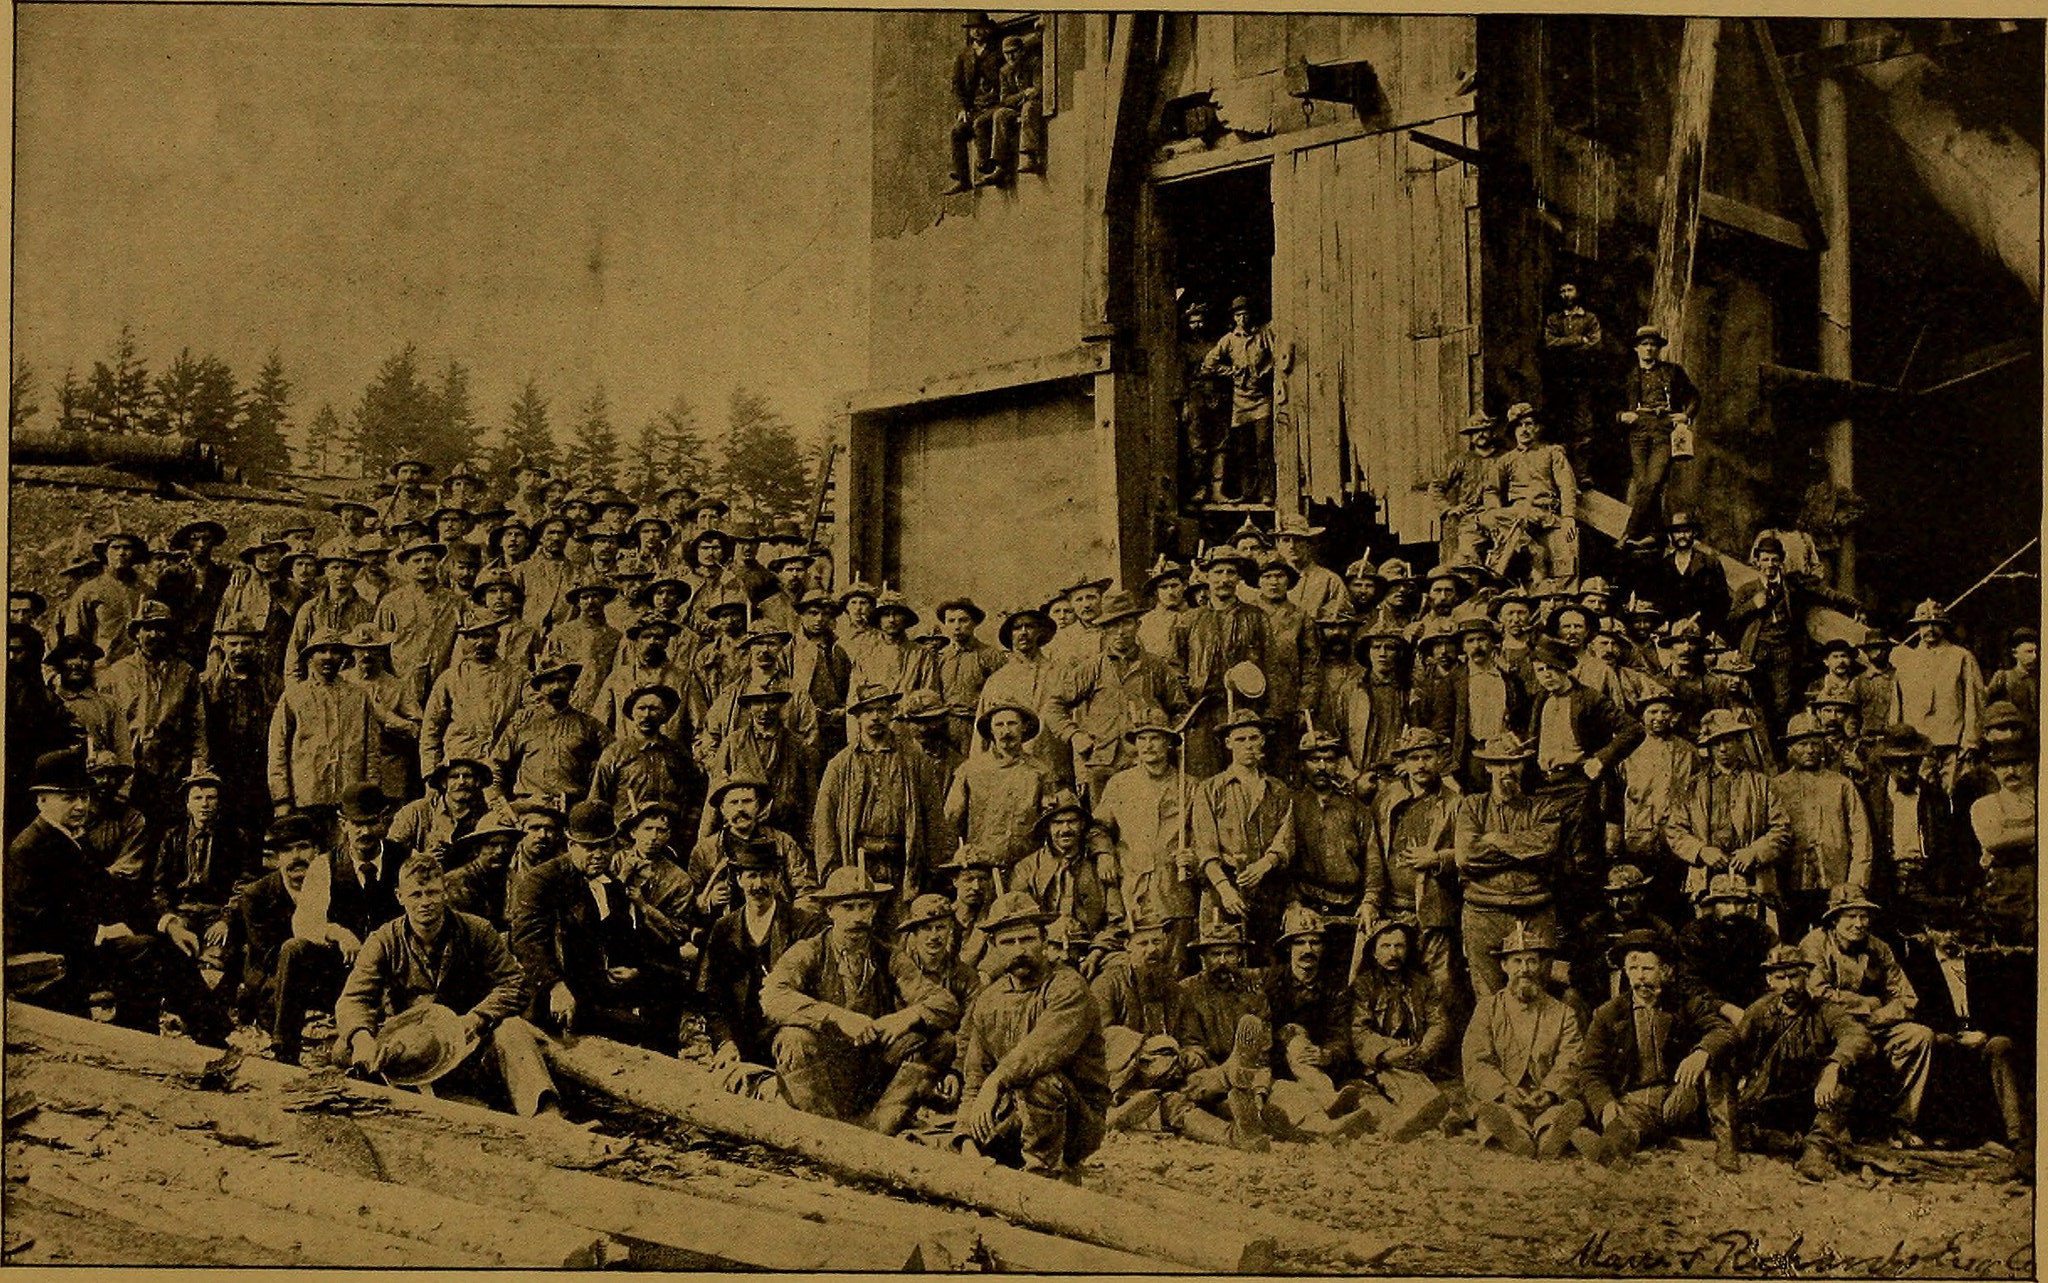 A faded group photograph of miners in the Memominee Iron Range